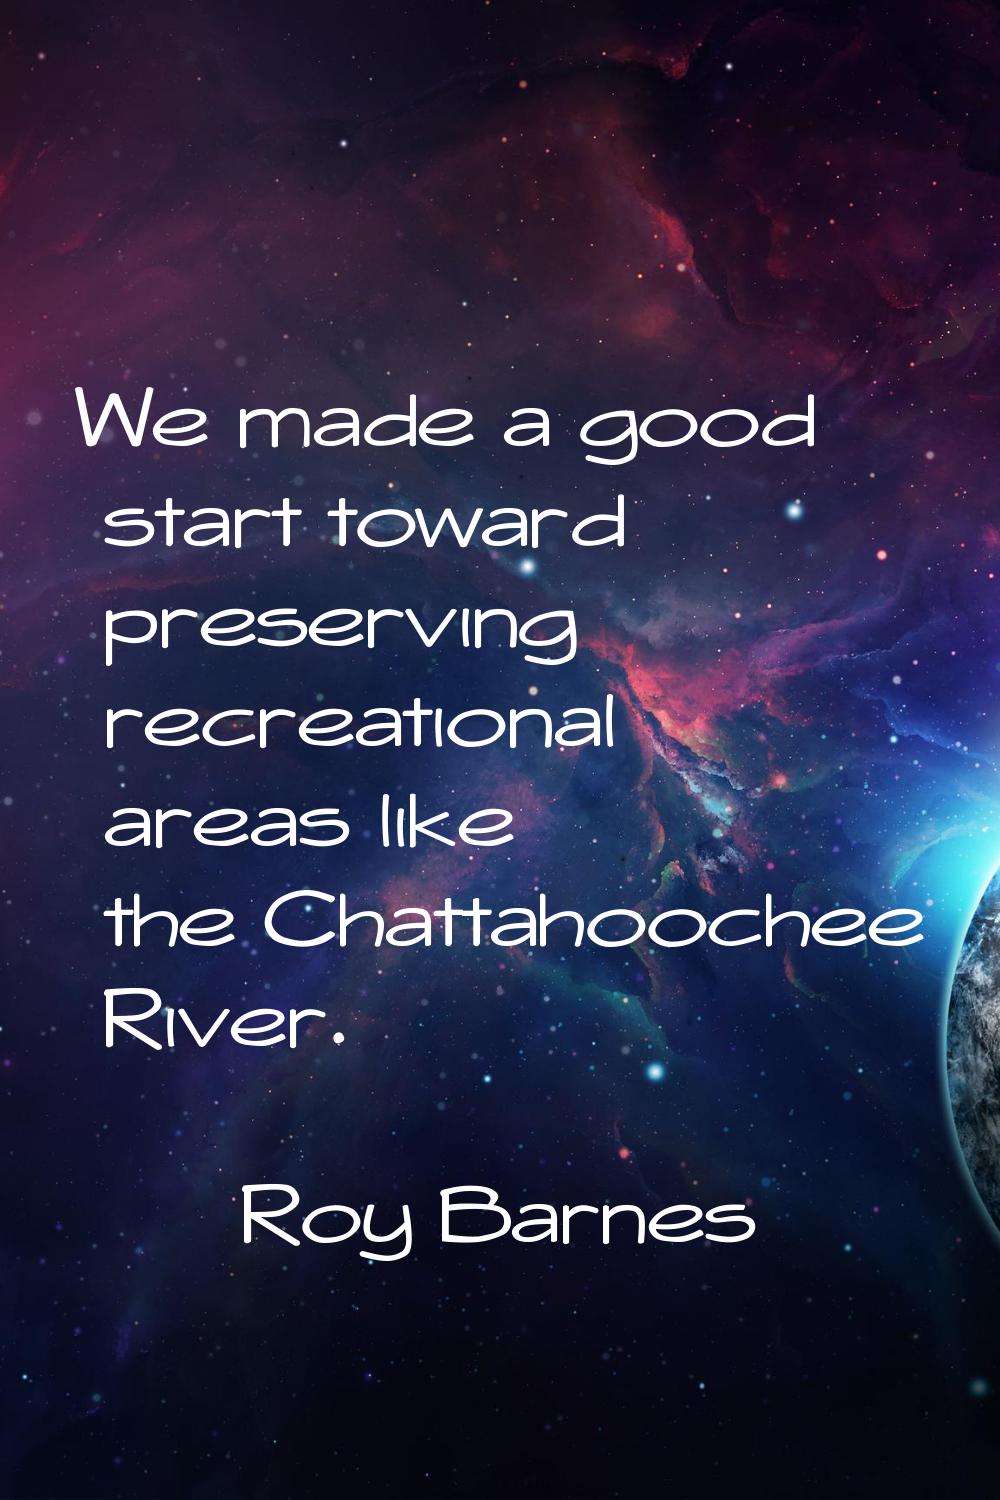 We made a good start toward preserving recreational areas like the Chattahoochee River.